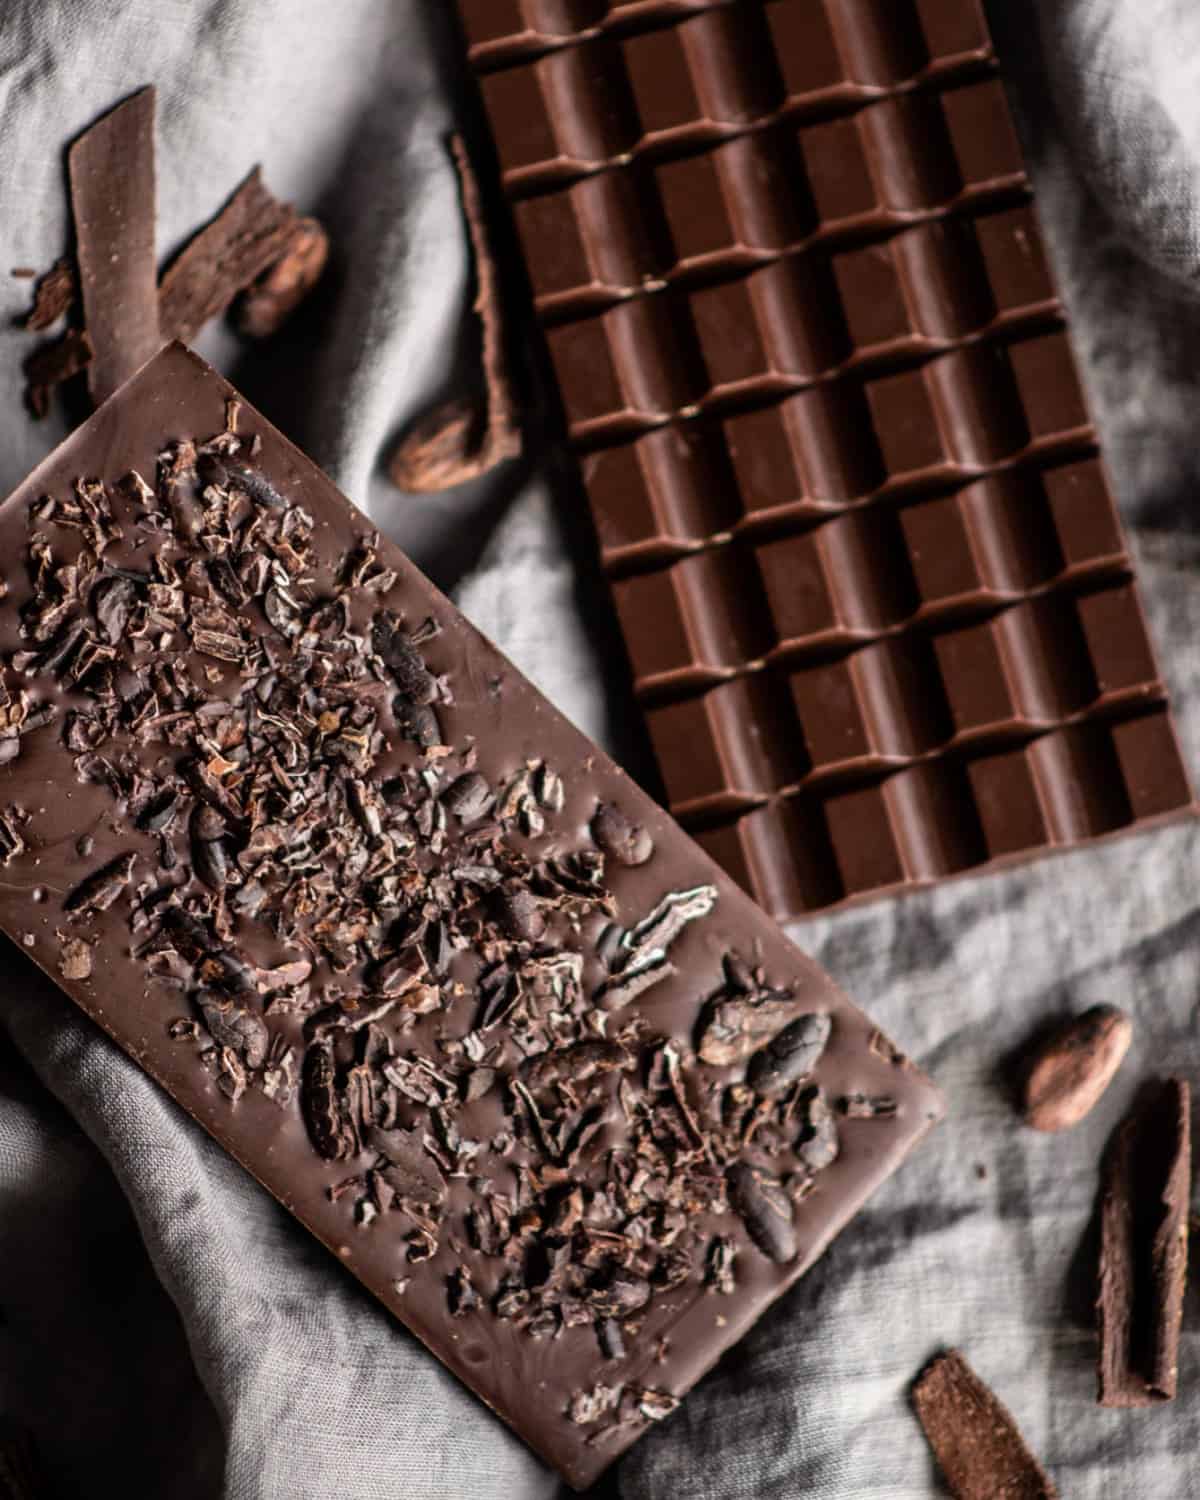 Dark chocolate bars with cocoa beans and shards of chocolate sprinkled nearby.